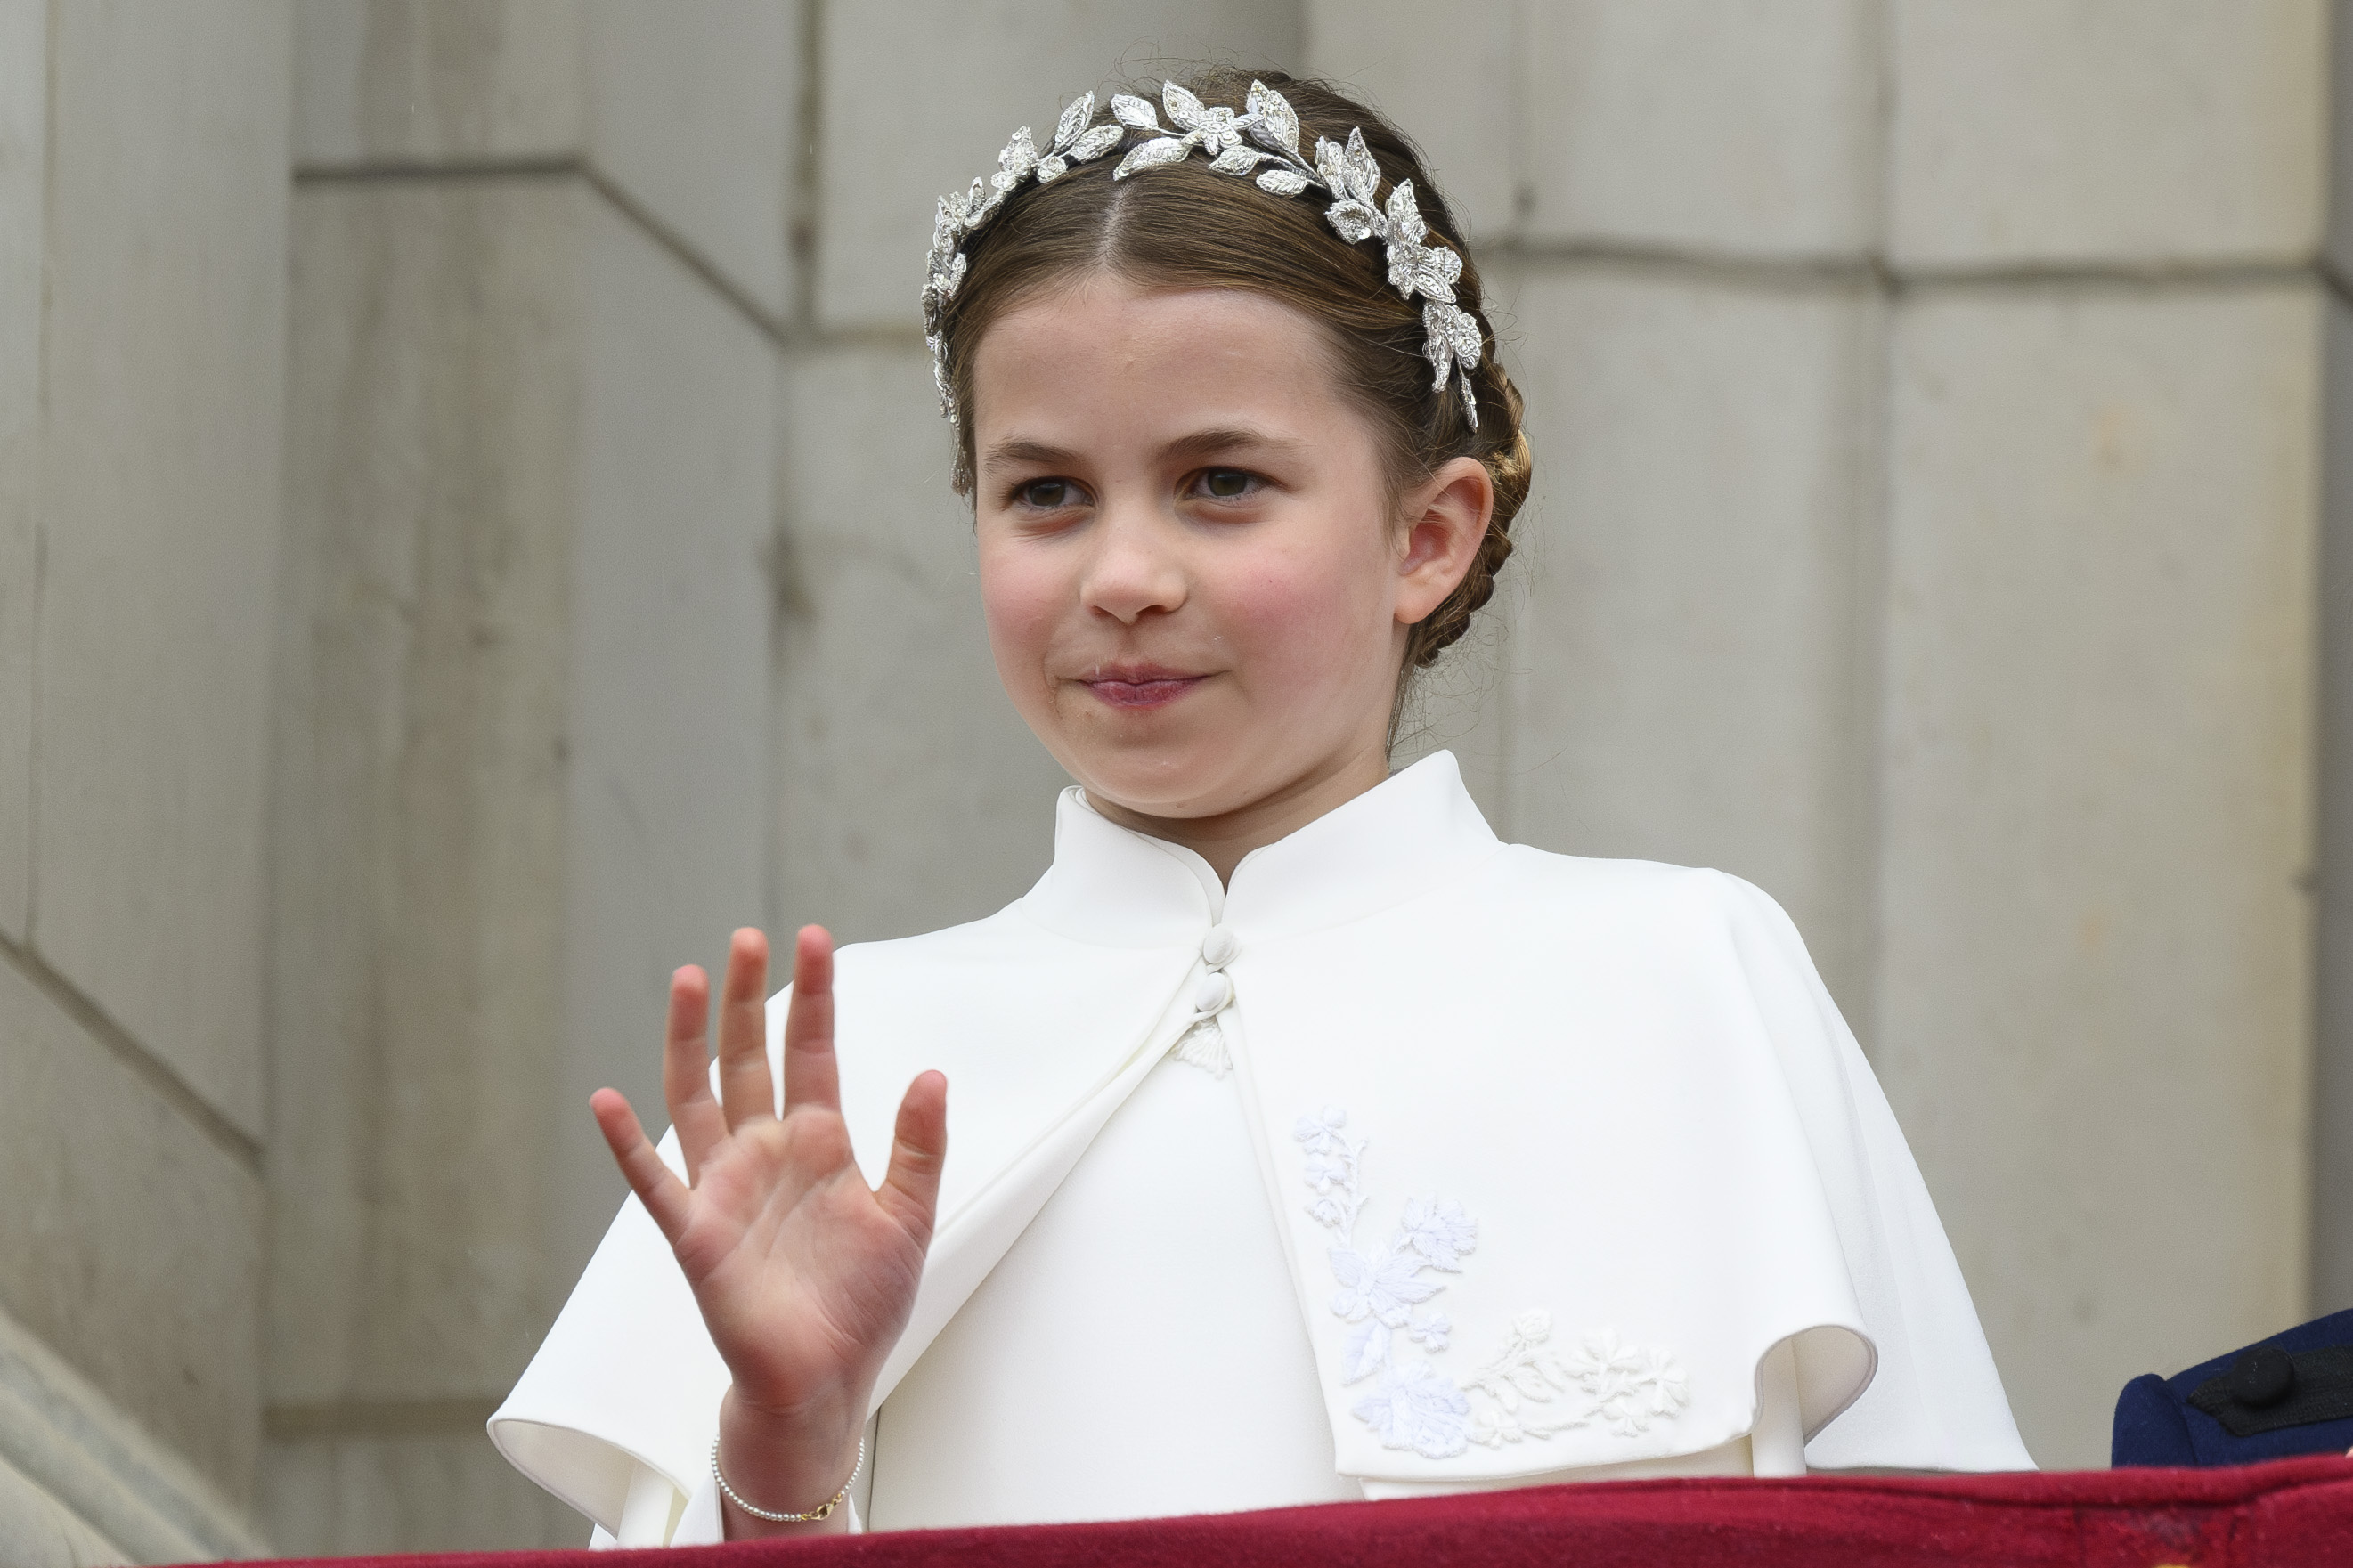 <p>Following her brother in the line of succession is Princess Charlotte, who is third in line to the British crown. Thanks to a law passed in 2011 by Parliament, the long-held practice of male-heir preference officially ended, meaning that even though <a href="https://www.wonderwall.com/celebrity/profiles/overview/duchess-kate-1356.article">Duchess Kate</a> and Prince William's third child is a boy, Charlotte will not be skipped (which is what happened to Queen Elizabeth II's only daughter, Princess Anne).</p>